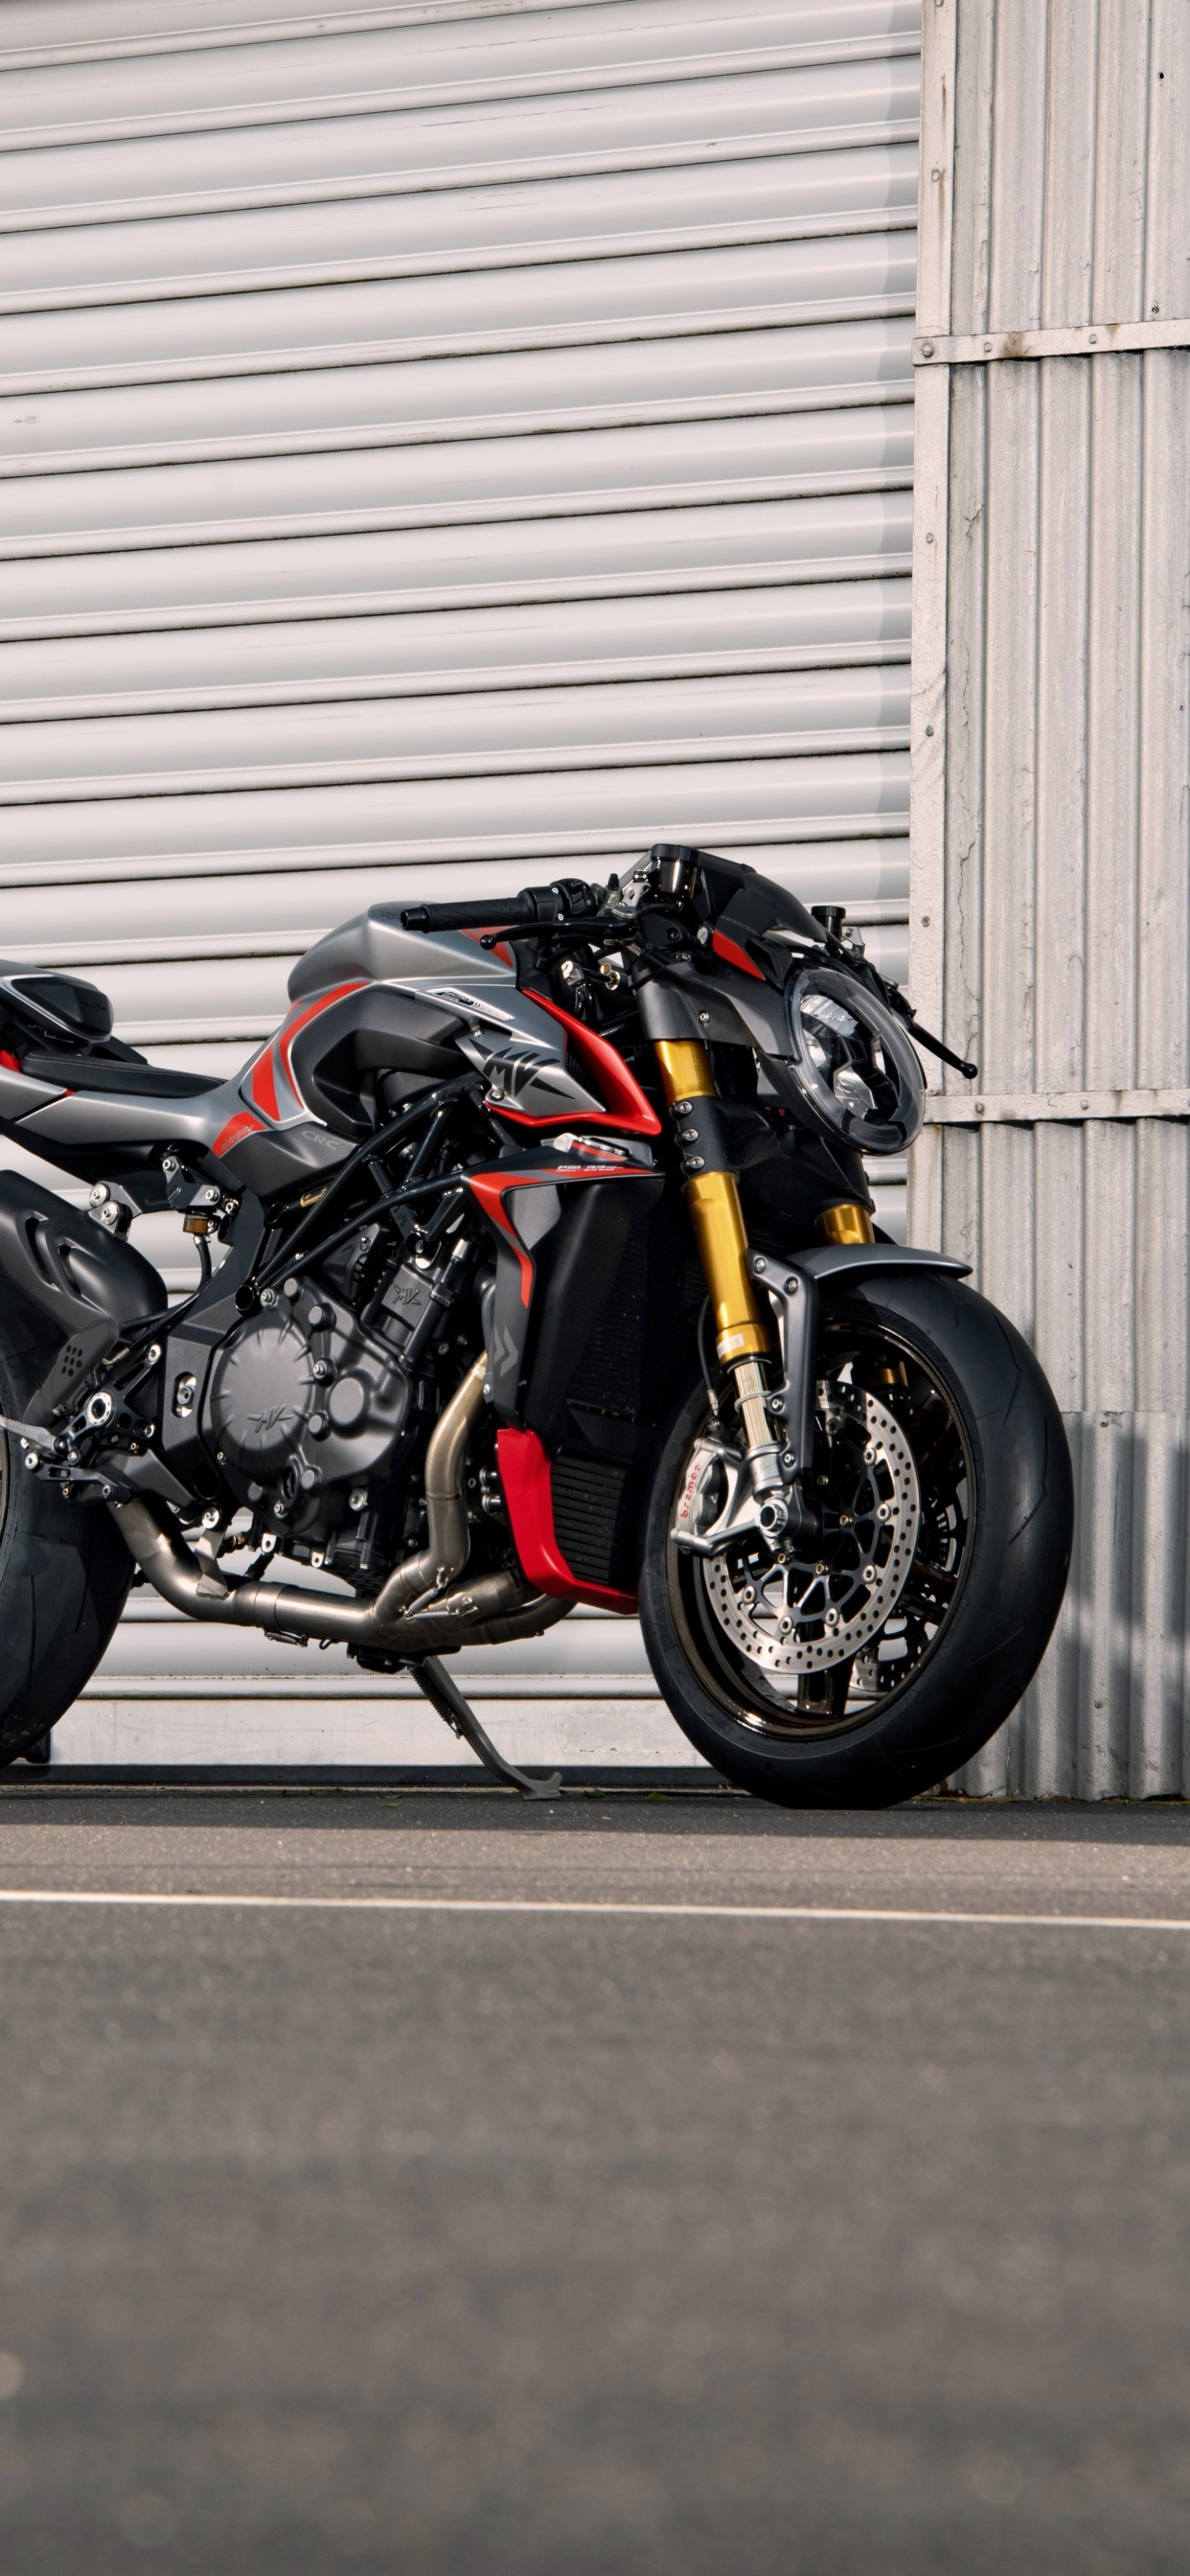 MV Agusta Brutale 1000, Nurburgring wallpaper, Limited edition, Bikes collection, 1250x2690 HD Phone